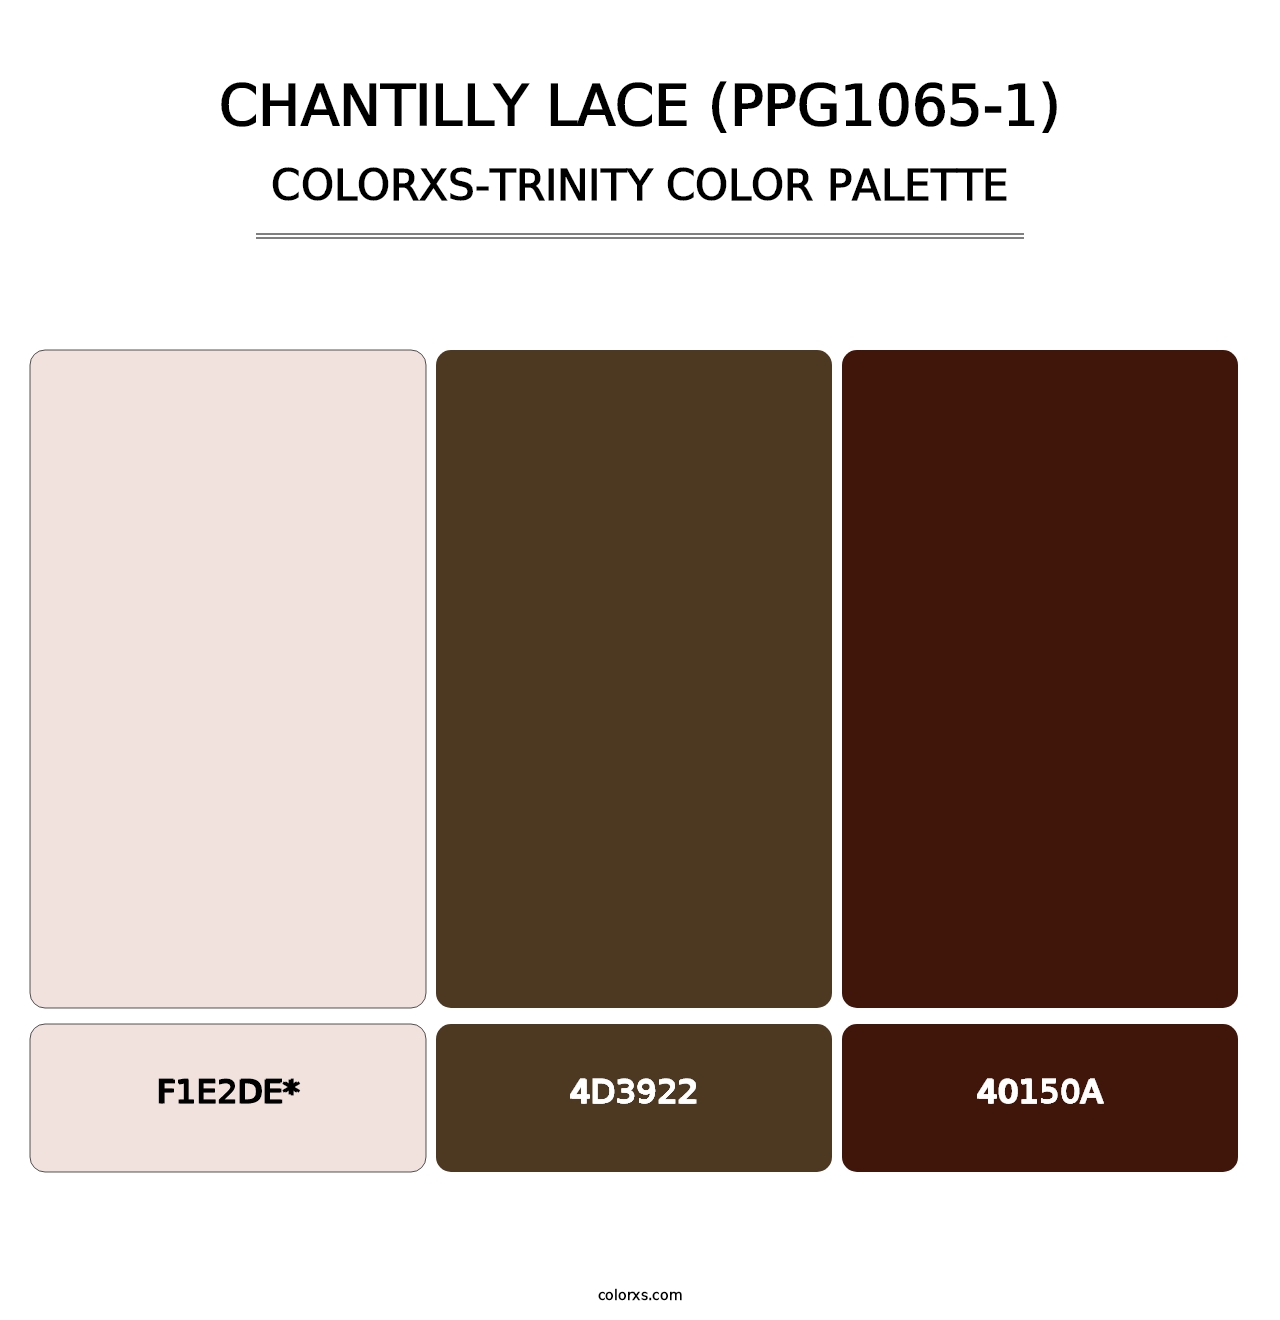 Chantilly Lace (PPG1065-1) - Colorxs Trinity Palette